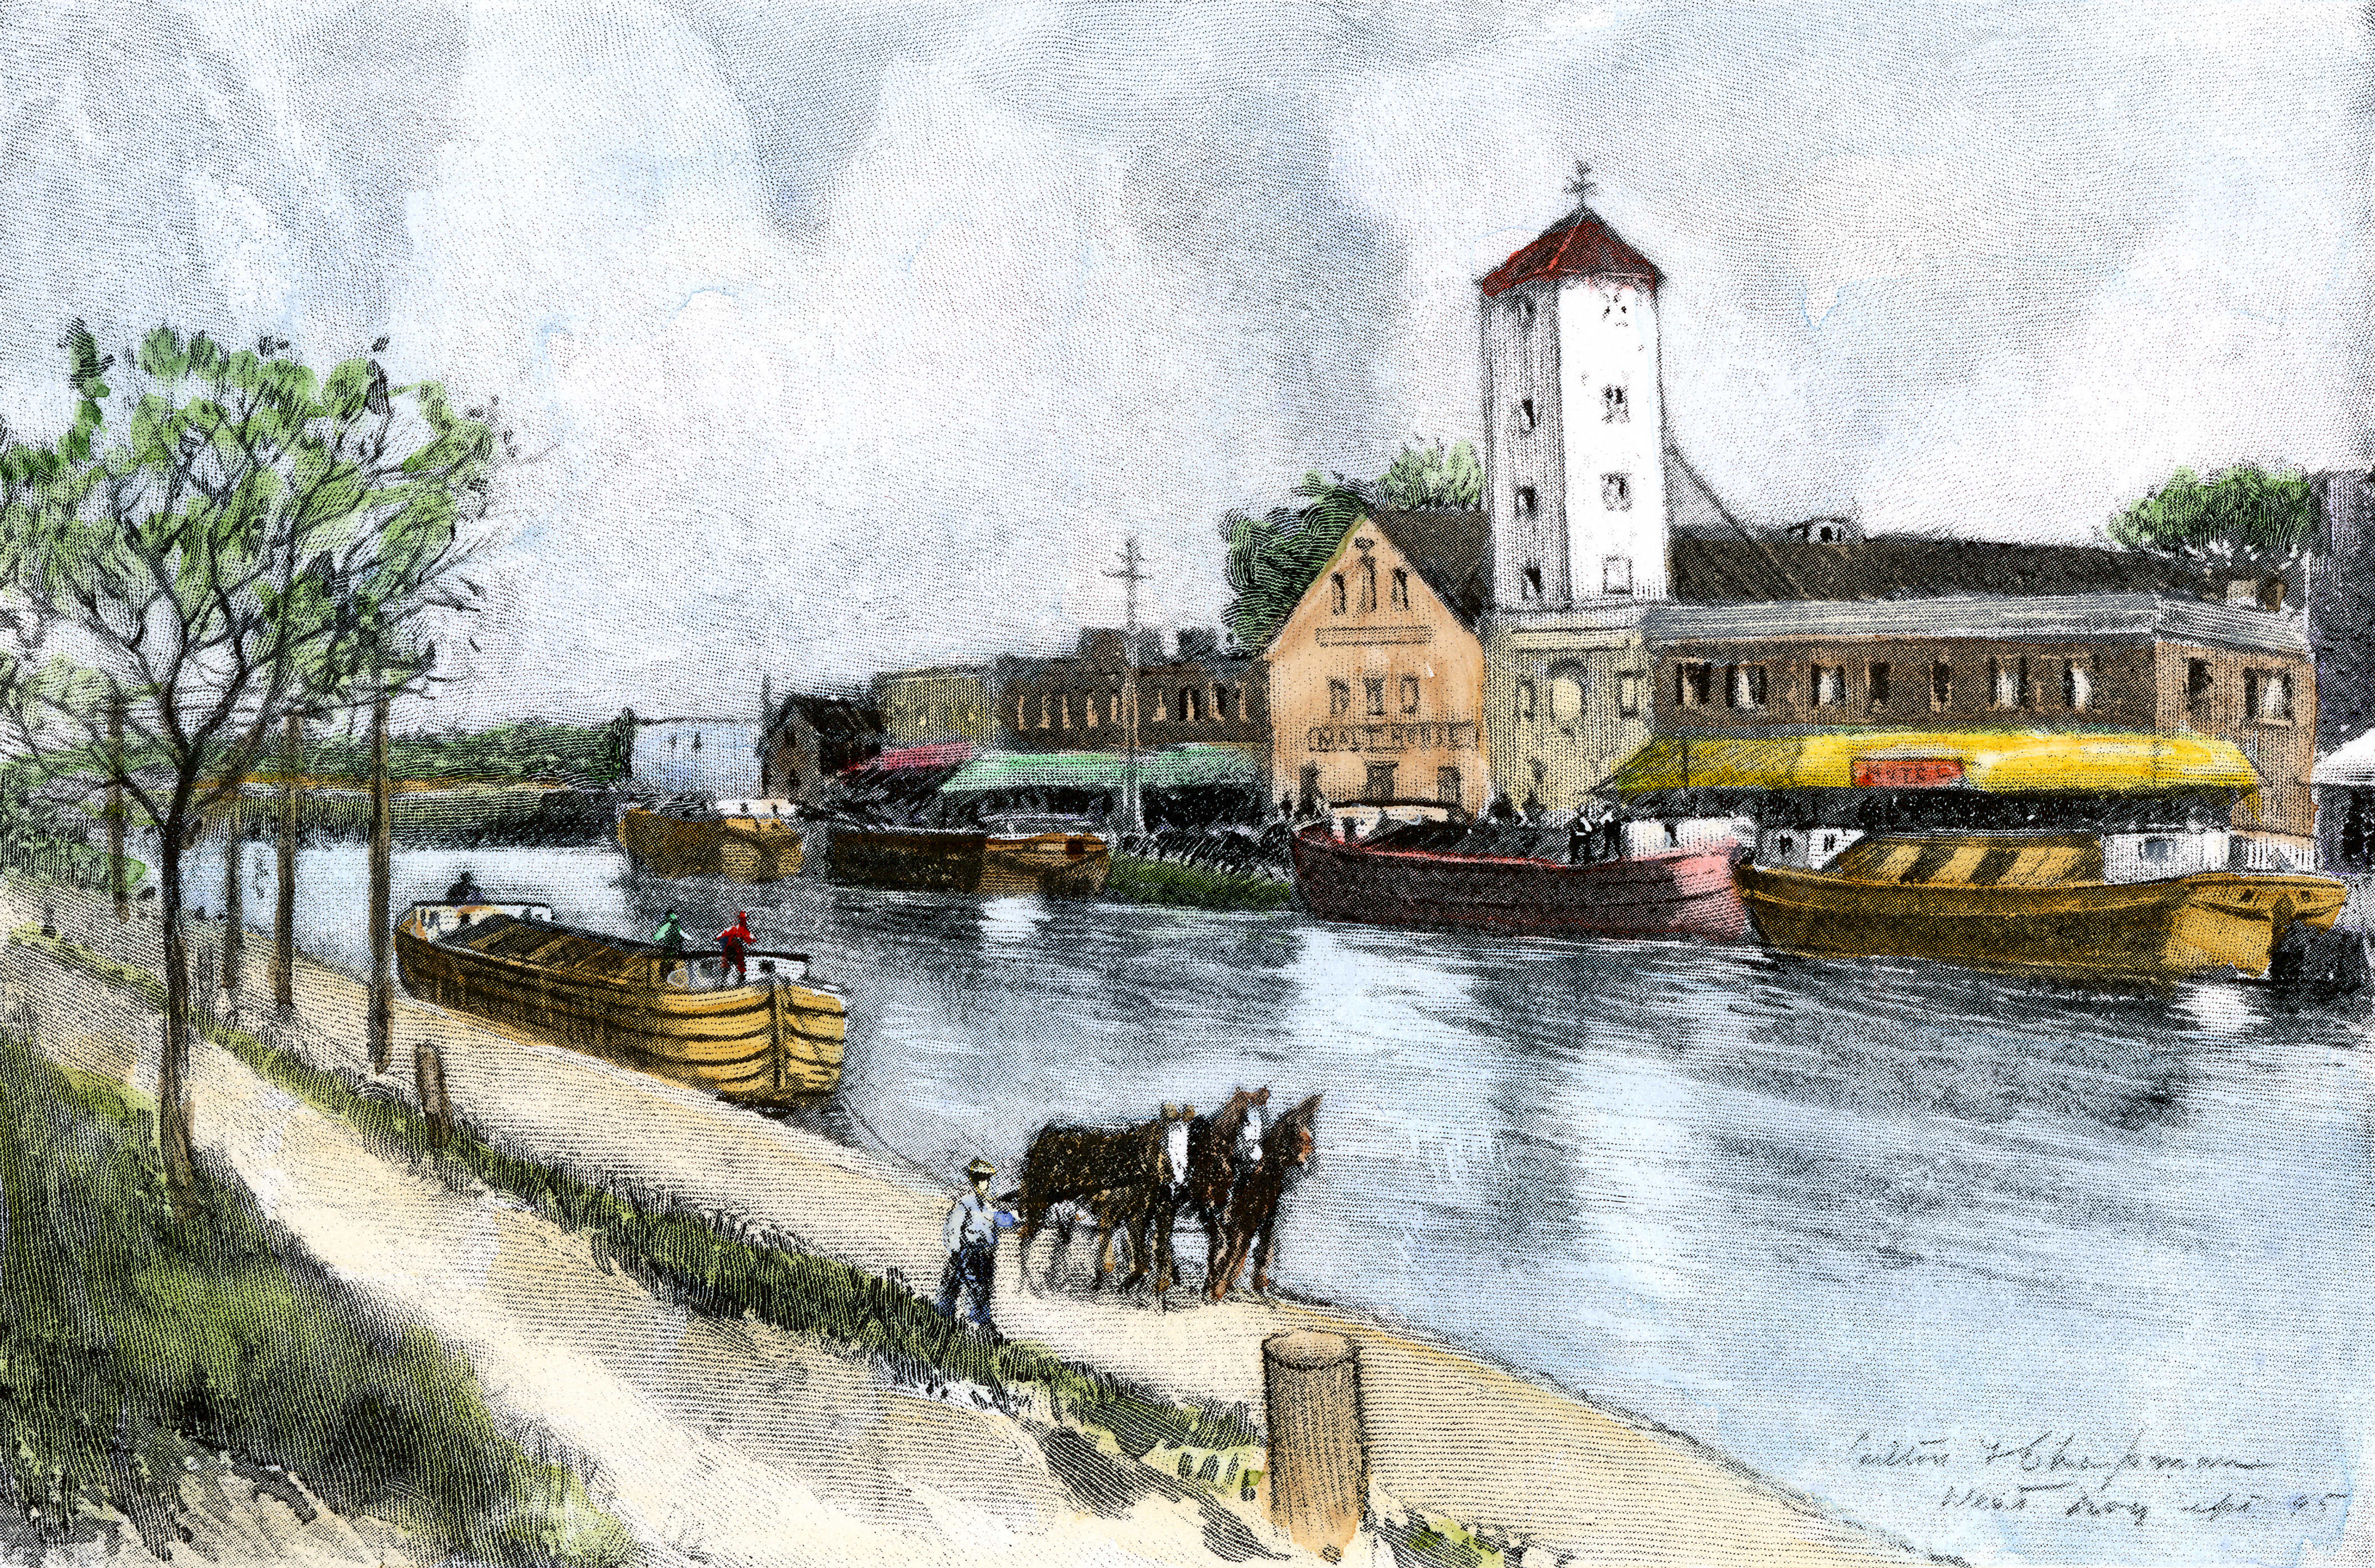 Barge on the Erie Canal at West Troy, New York, in the late 1800s. Hand-colored halftone reproduction of a 19th-century illustration. (North Wind Picture Archives via AP Images)